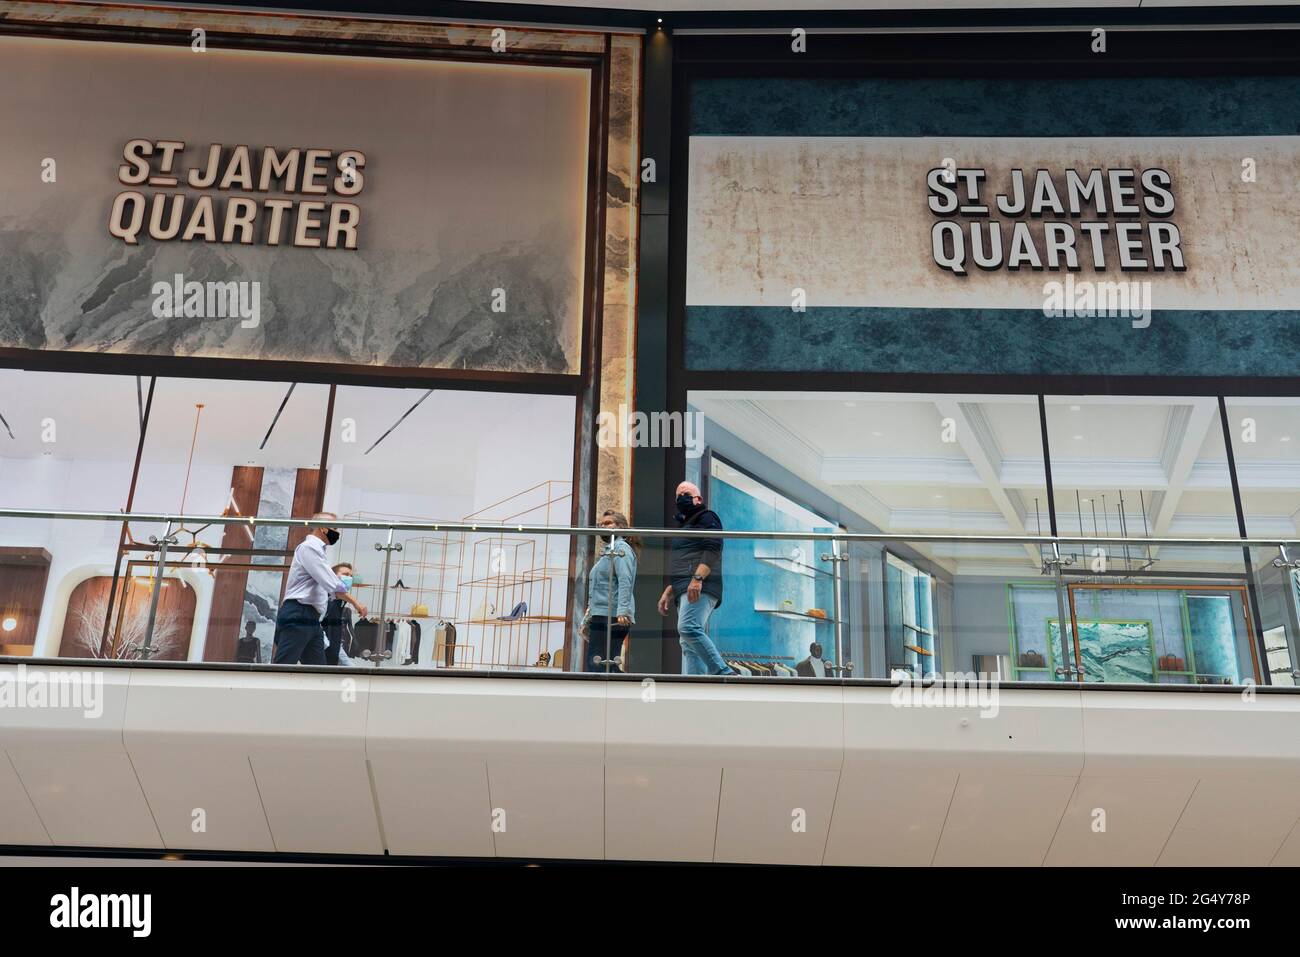 Edinburgh, Scotland, UK. 24 June 2021. First images of the new St James Quarter which opened this morning in Edinburgh. The large retail and residential complex replaced the St James Centre which occupied the site for many years.Pic; Some stores remain closed,.  Iain Masterton/Alamy Live News Stock Photo